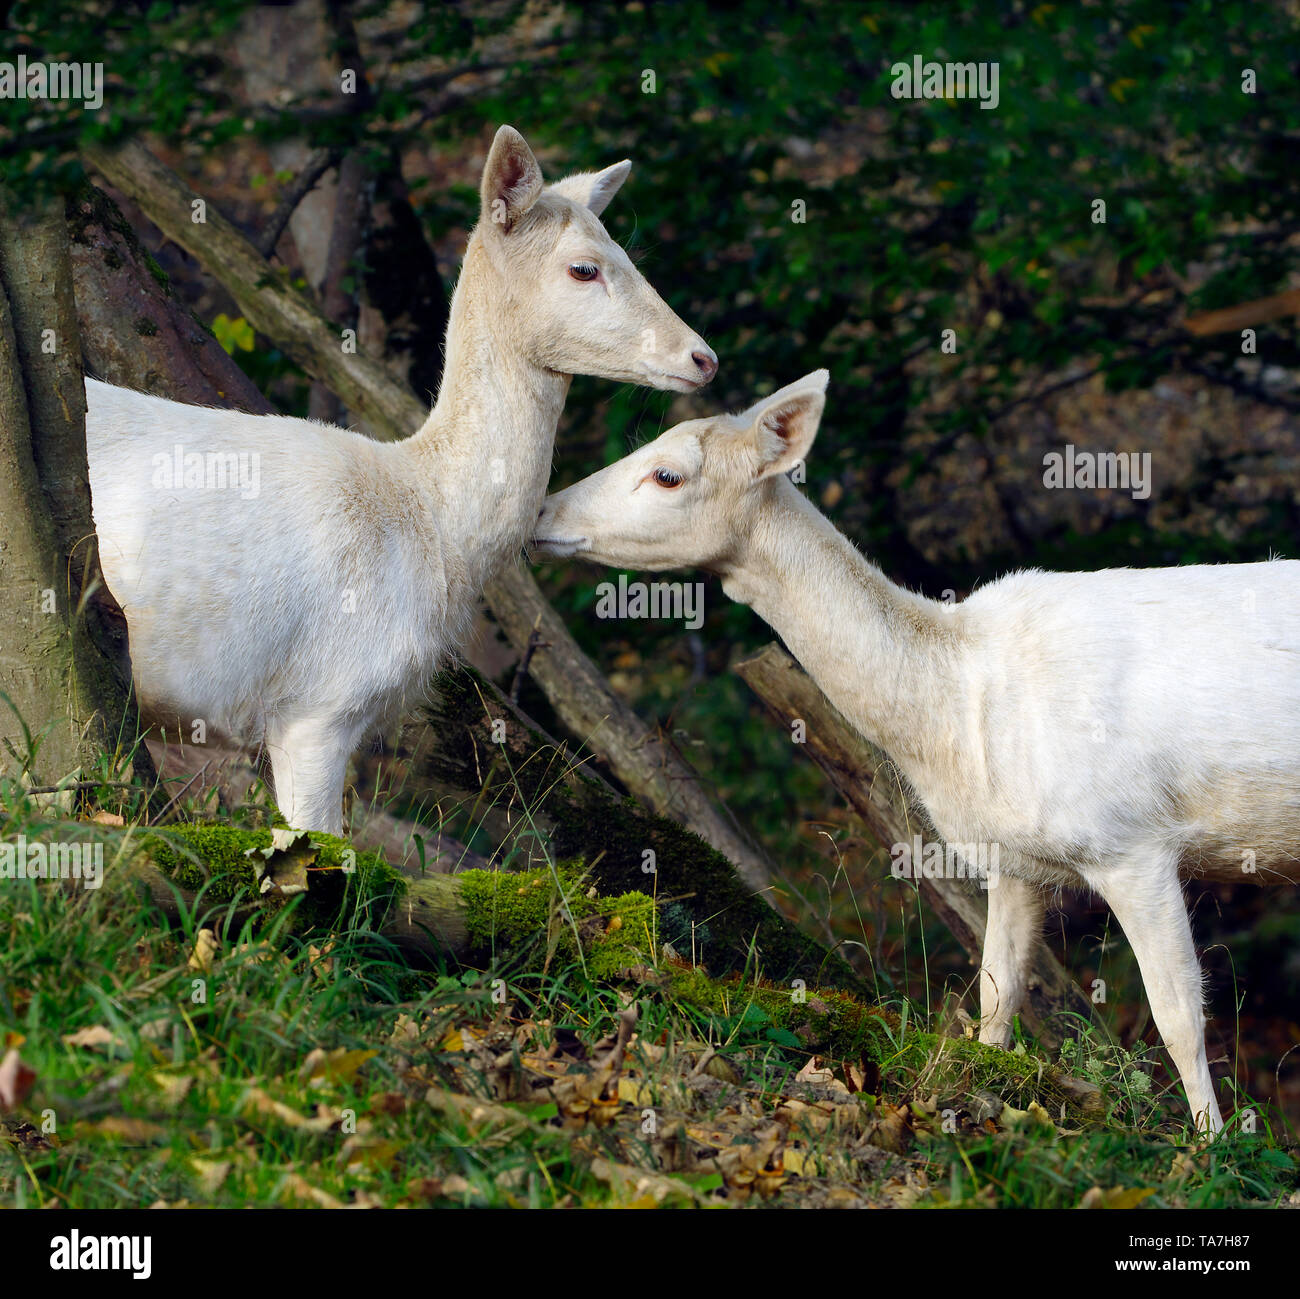 White Fallow Deer (Dama dama). Two does greeting each other tenderly. Germany Stock Photo